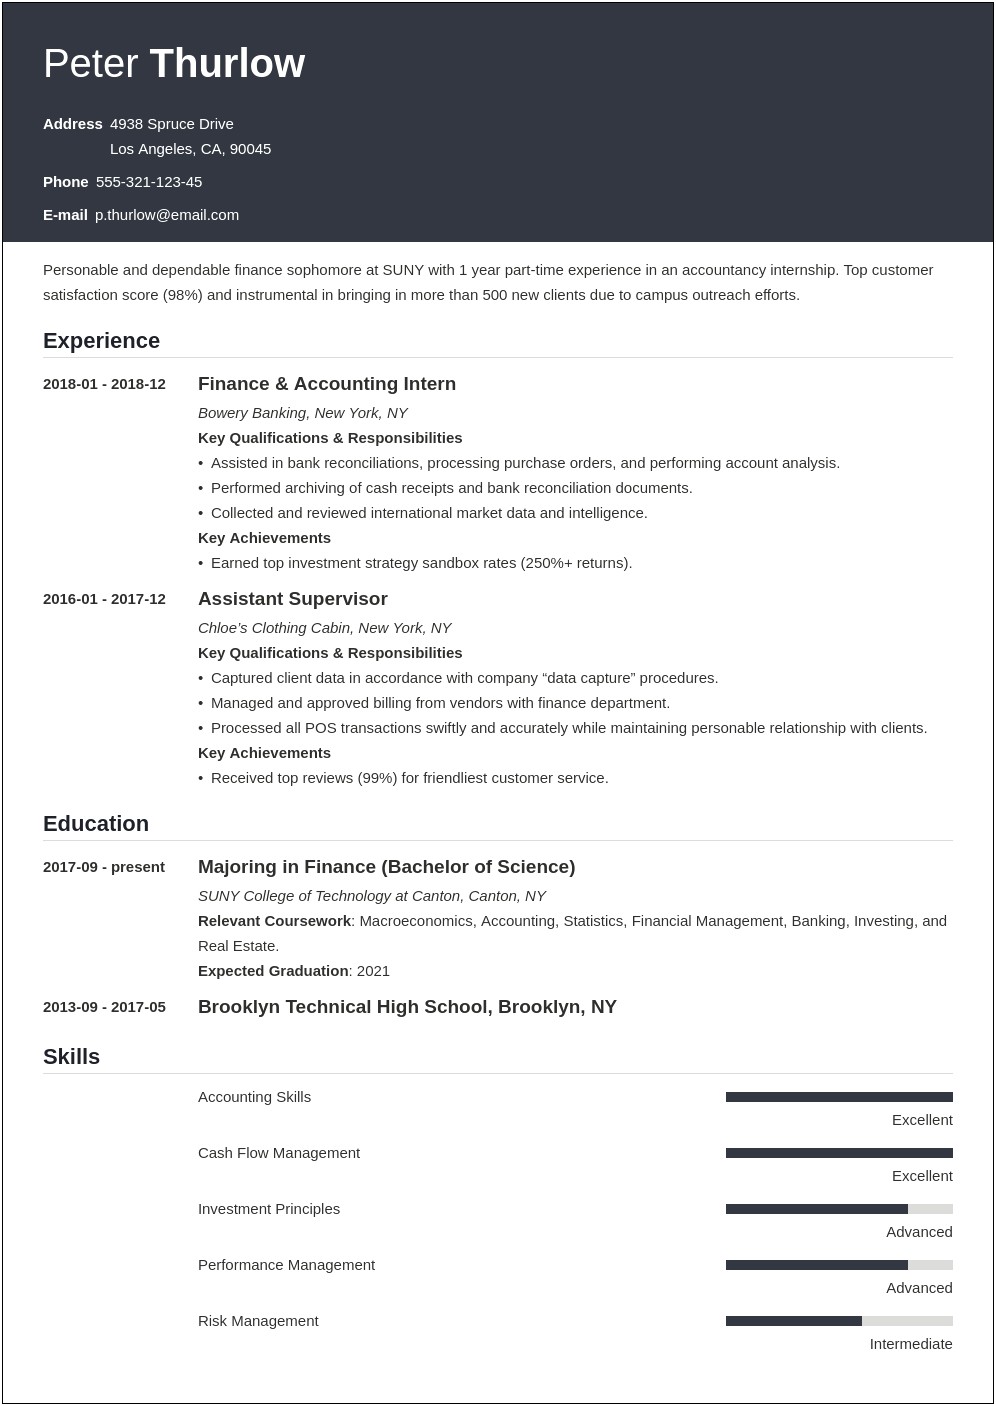 Resume Samples For Student Internship Without Experience